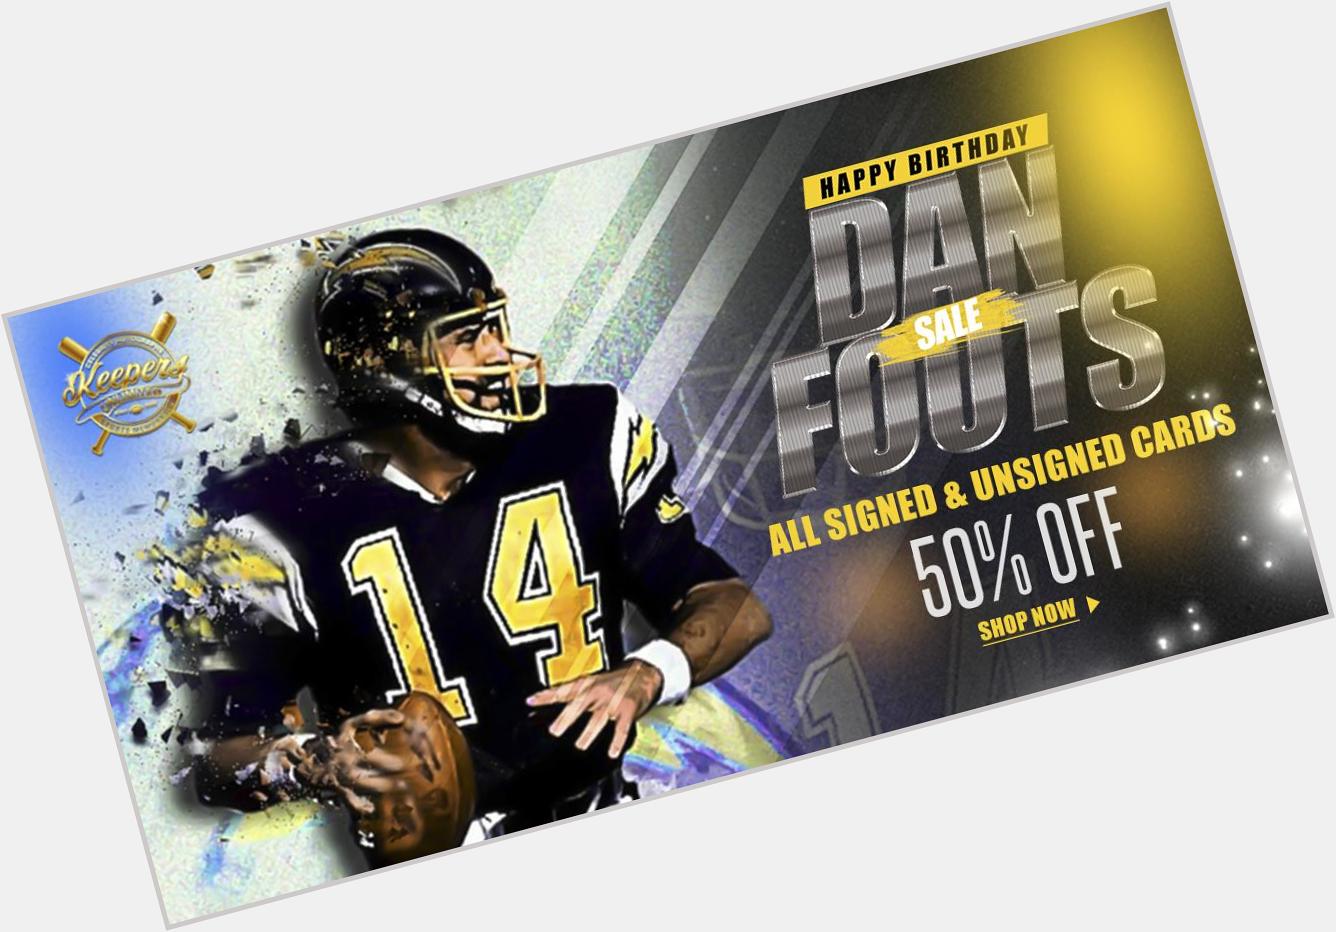 Happy Birthday to Take 50% off all Dan Fouts signed and unsigned football cards!  